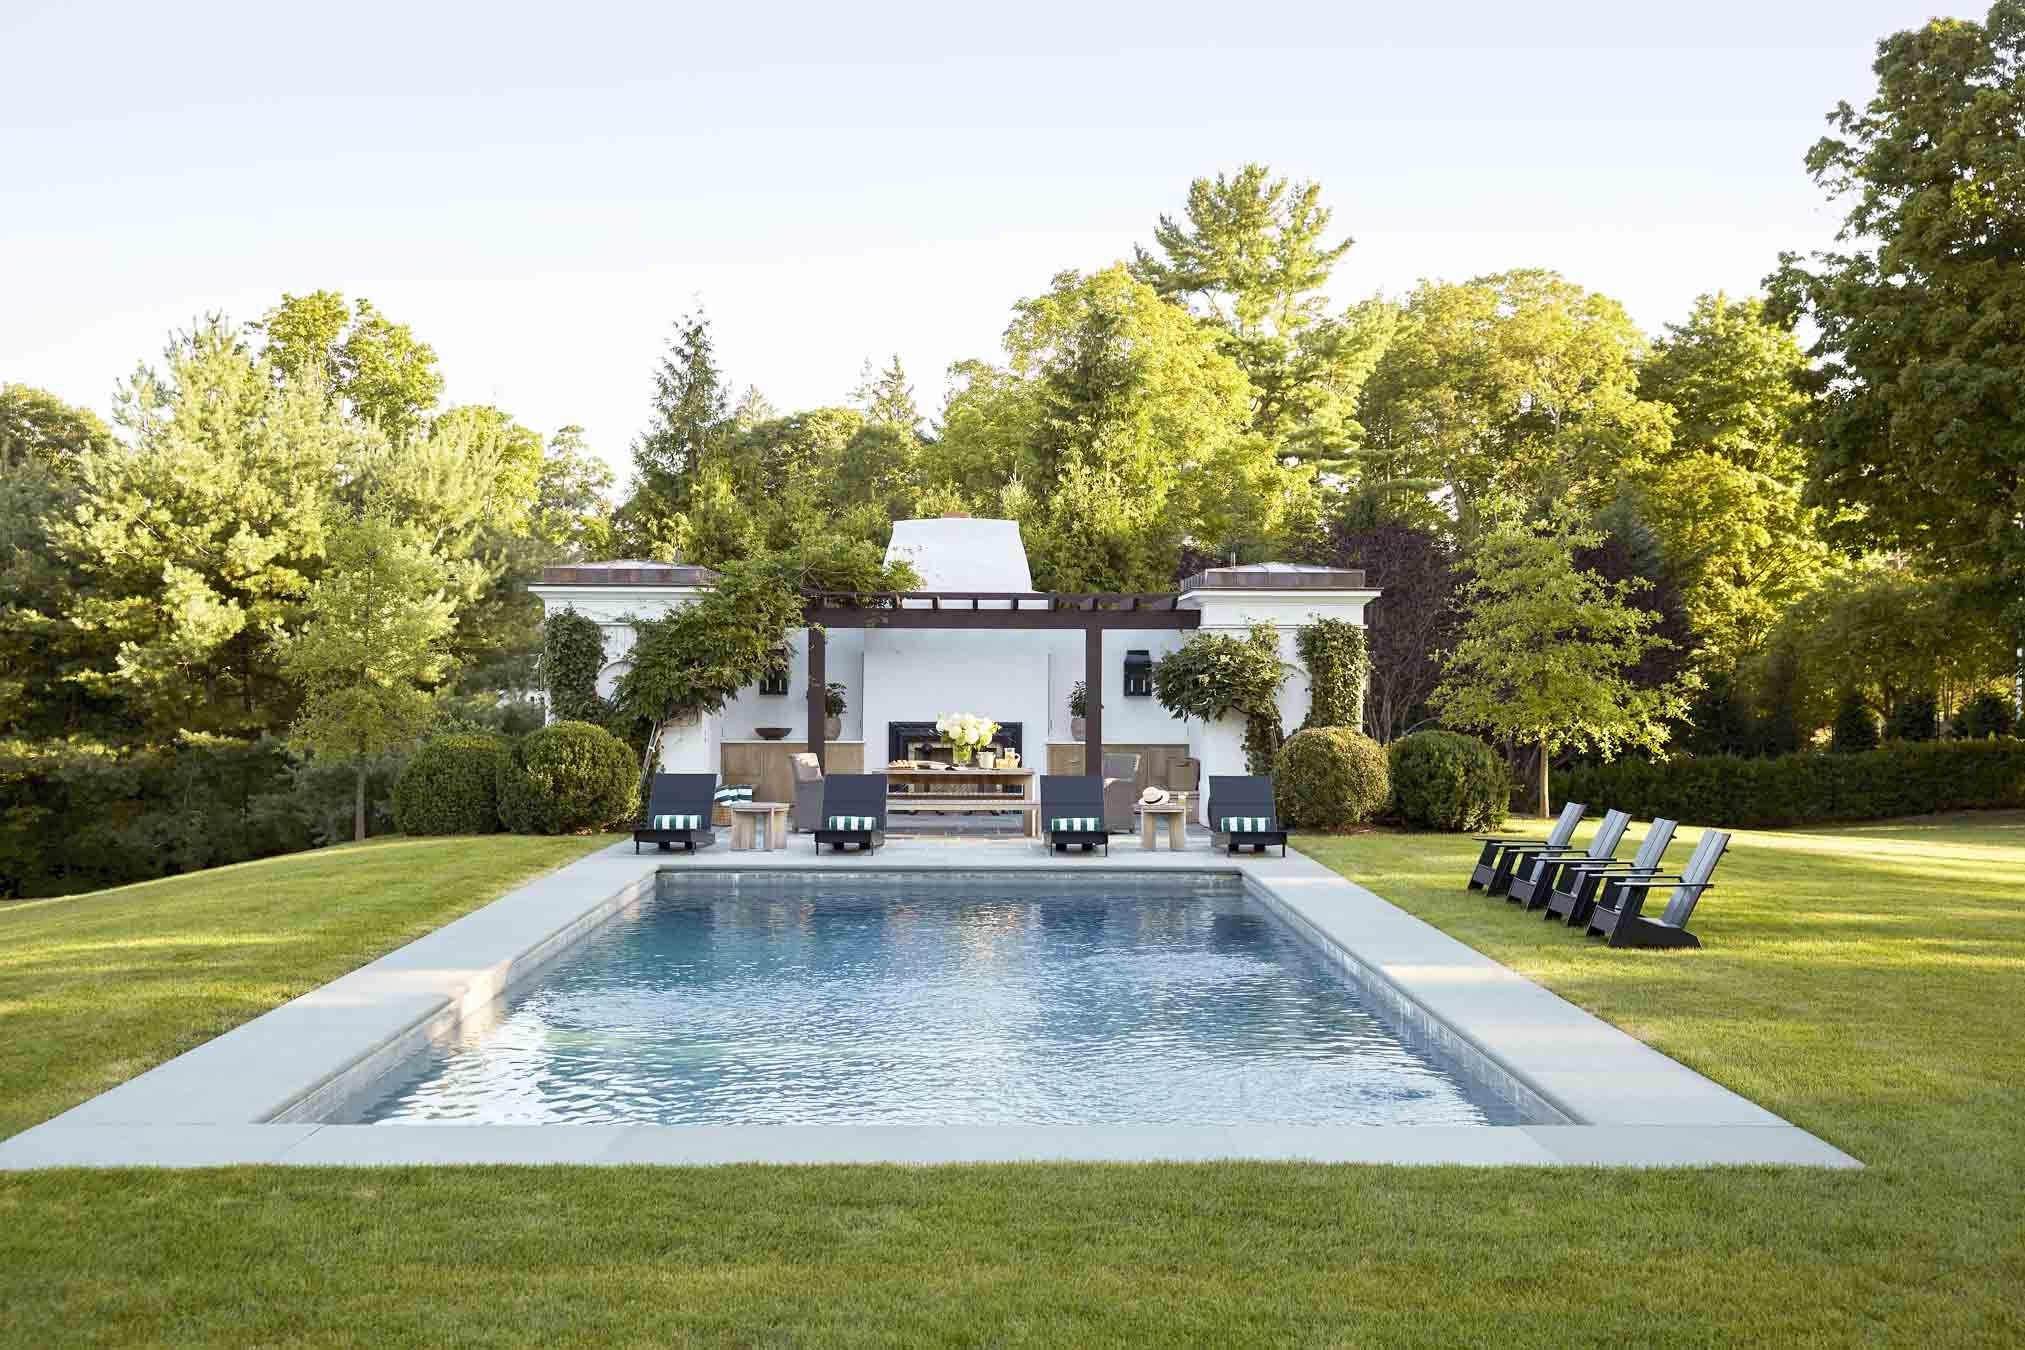 a rectangular pool inset into a lush lawn with a white california style poorhouse int he background